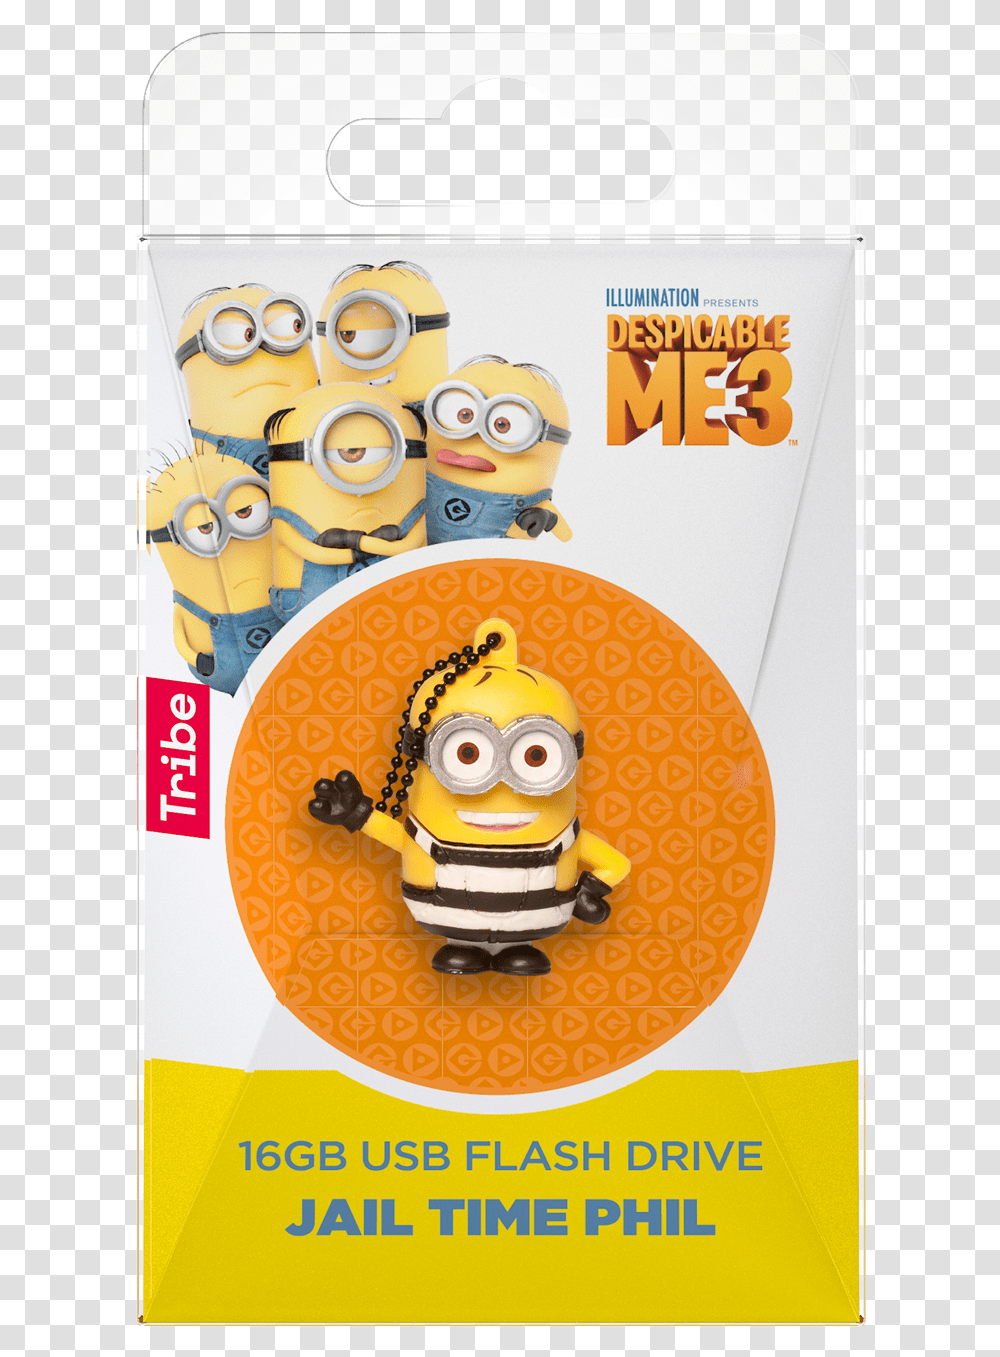 Despicable Me Crazy Run Dave, Toy, Advertisement, Poster, Flyer Transparent Png